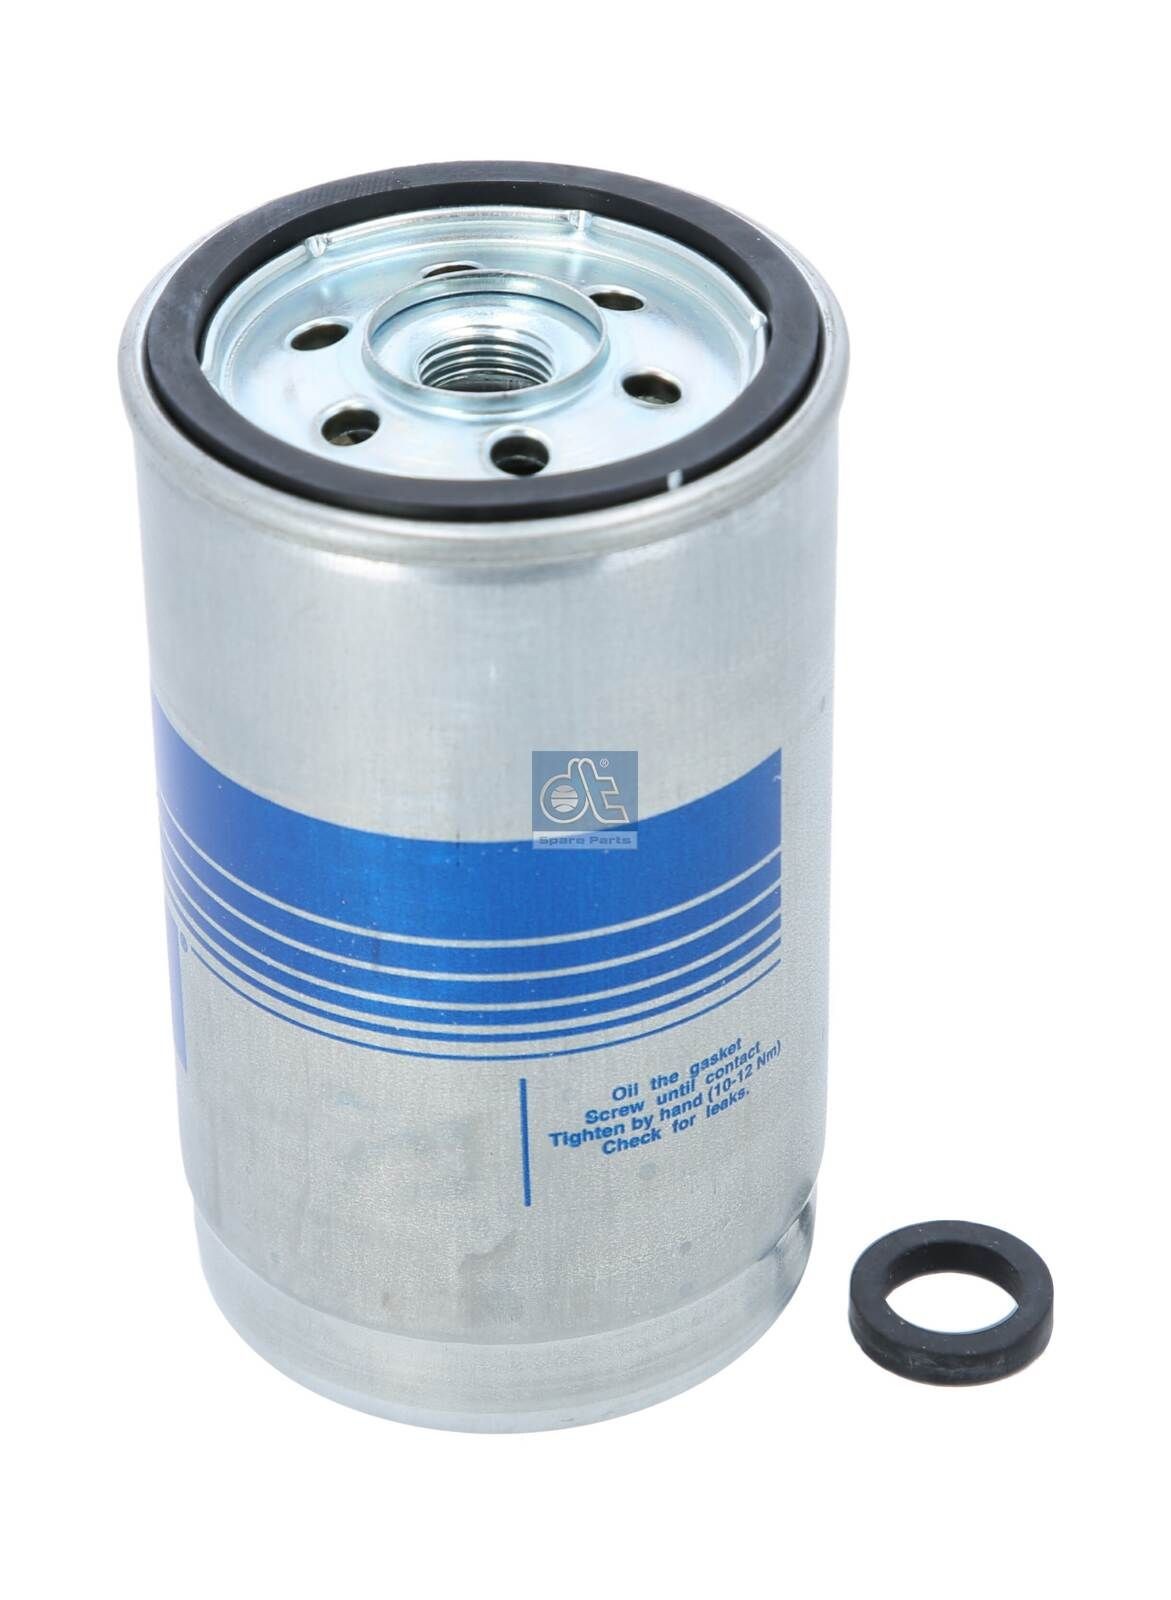 WDK 725 DT Spare Parts 3.22003 Fuel filter 0118 2224